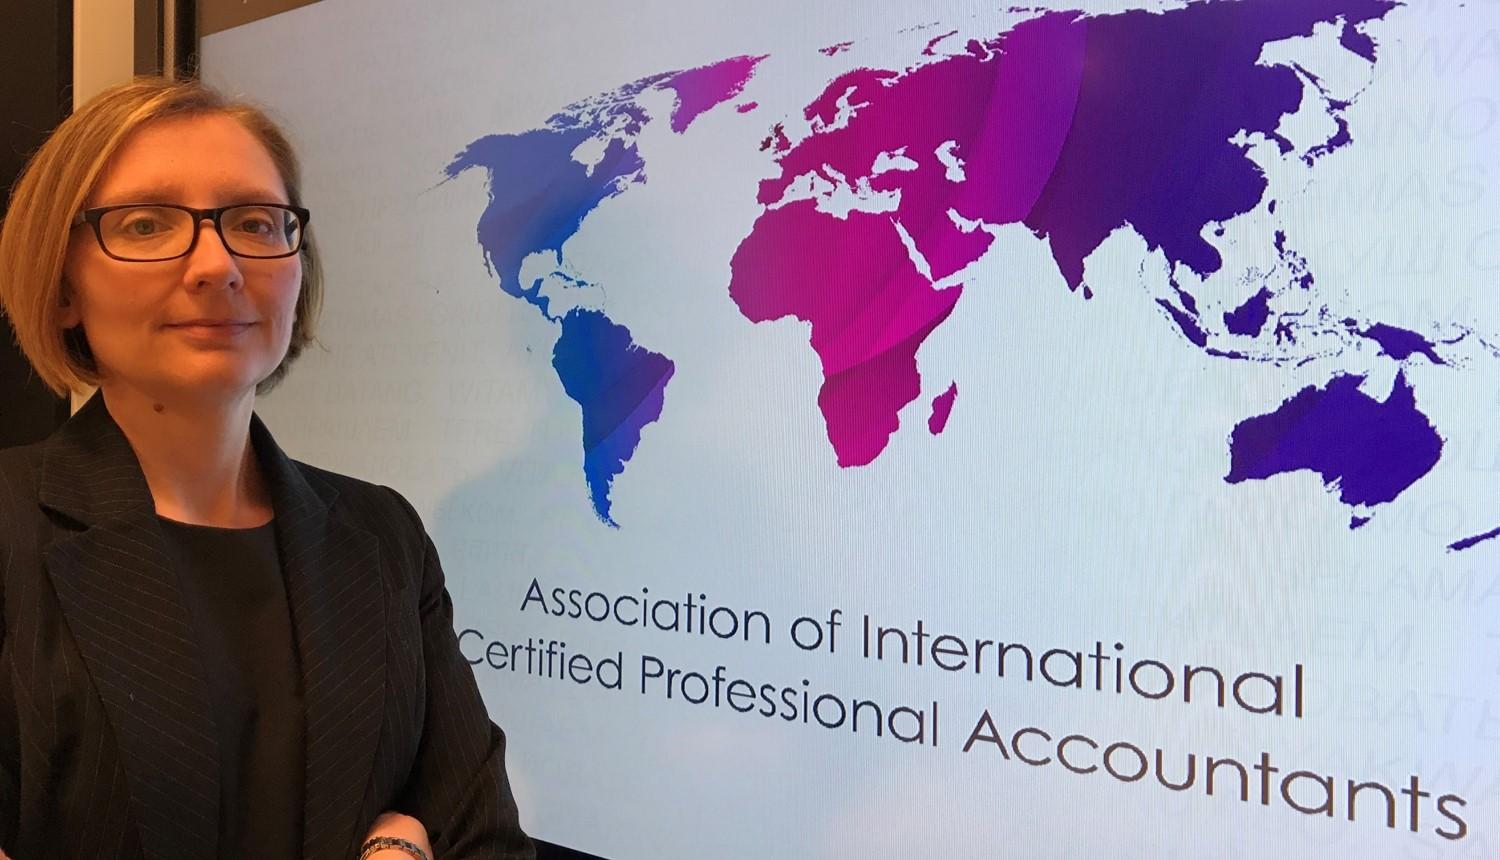 Elaine Smyth, senior manager of professional standards at the Association of International Certified Professional Accountants